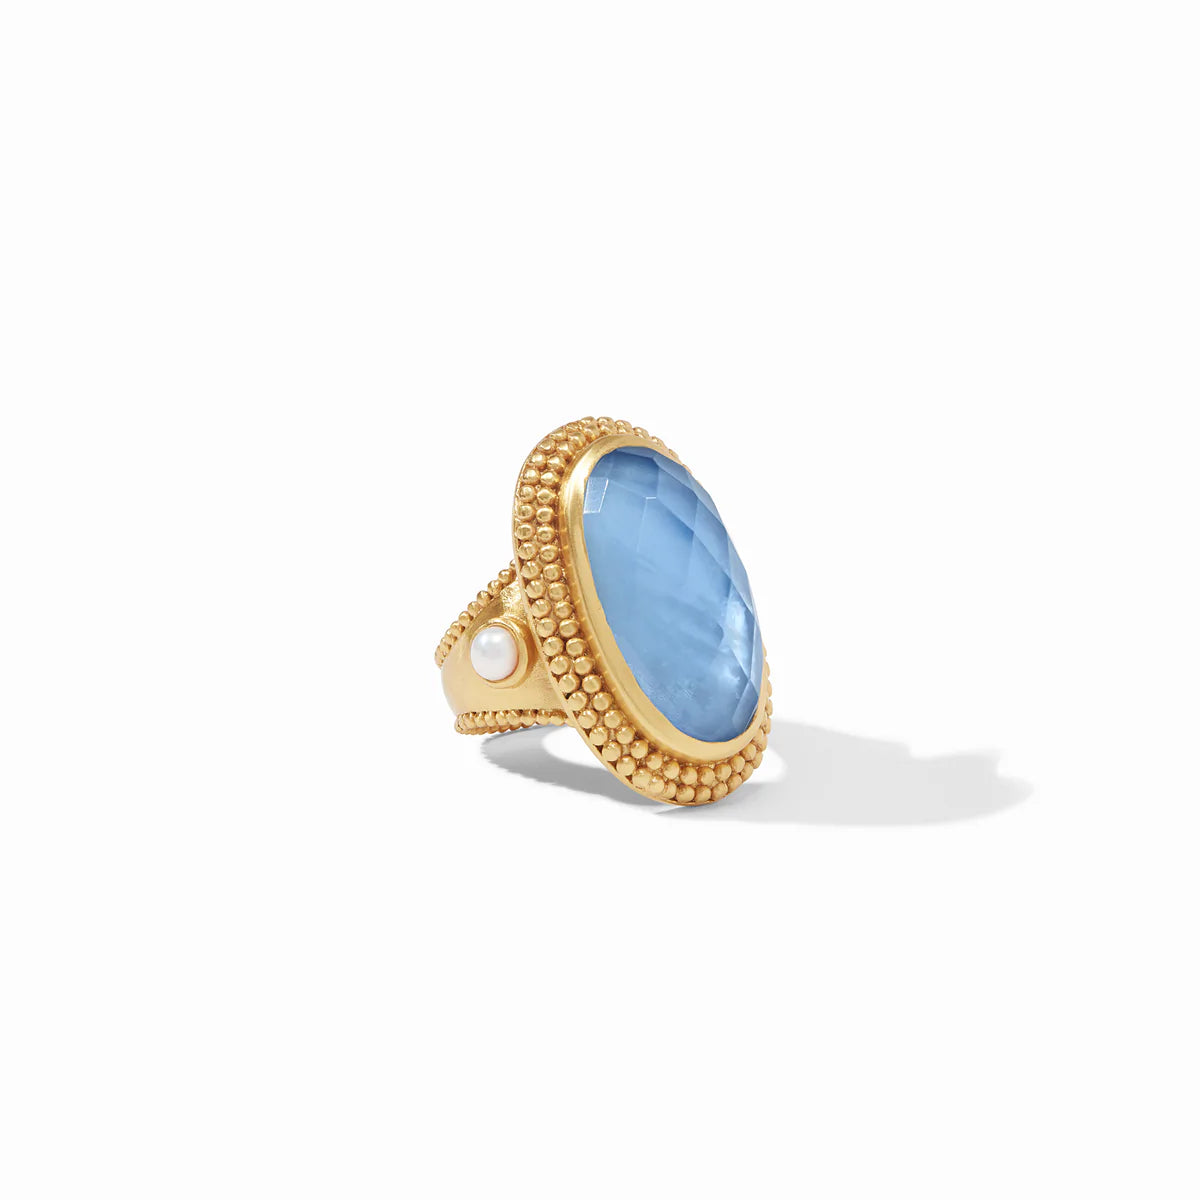 Flora Statement Ring Iridescent Chalcedony Blue by Julie Vos. 24K gold plate, glass doublet, freshwater pearl cabochons 1.25 inch length. Shop at The Painted Cottage in Edgewater, MD.